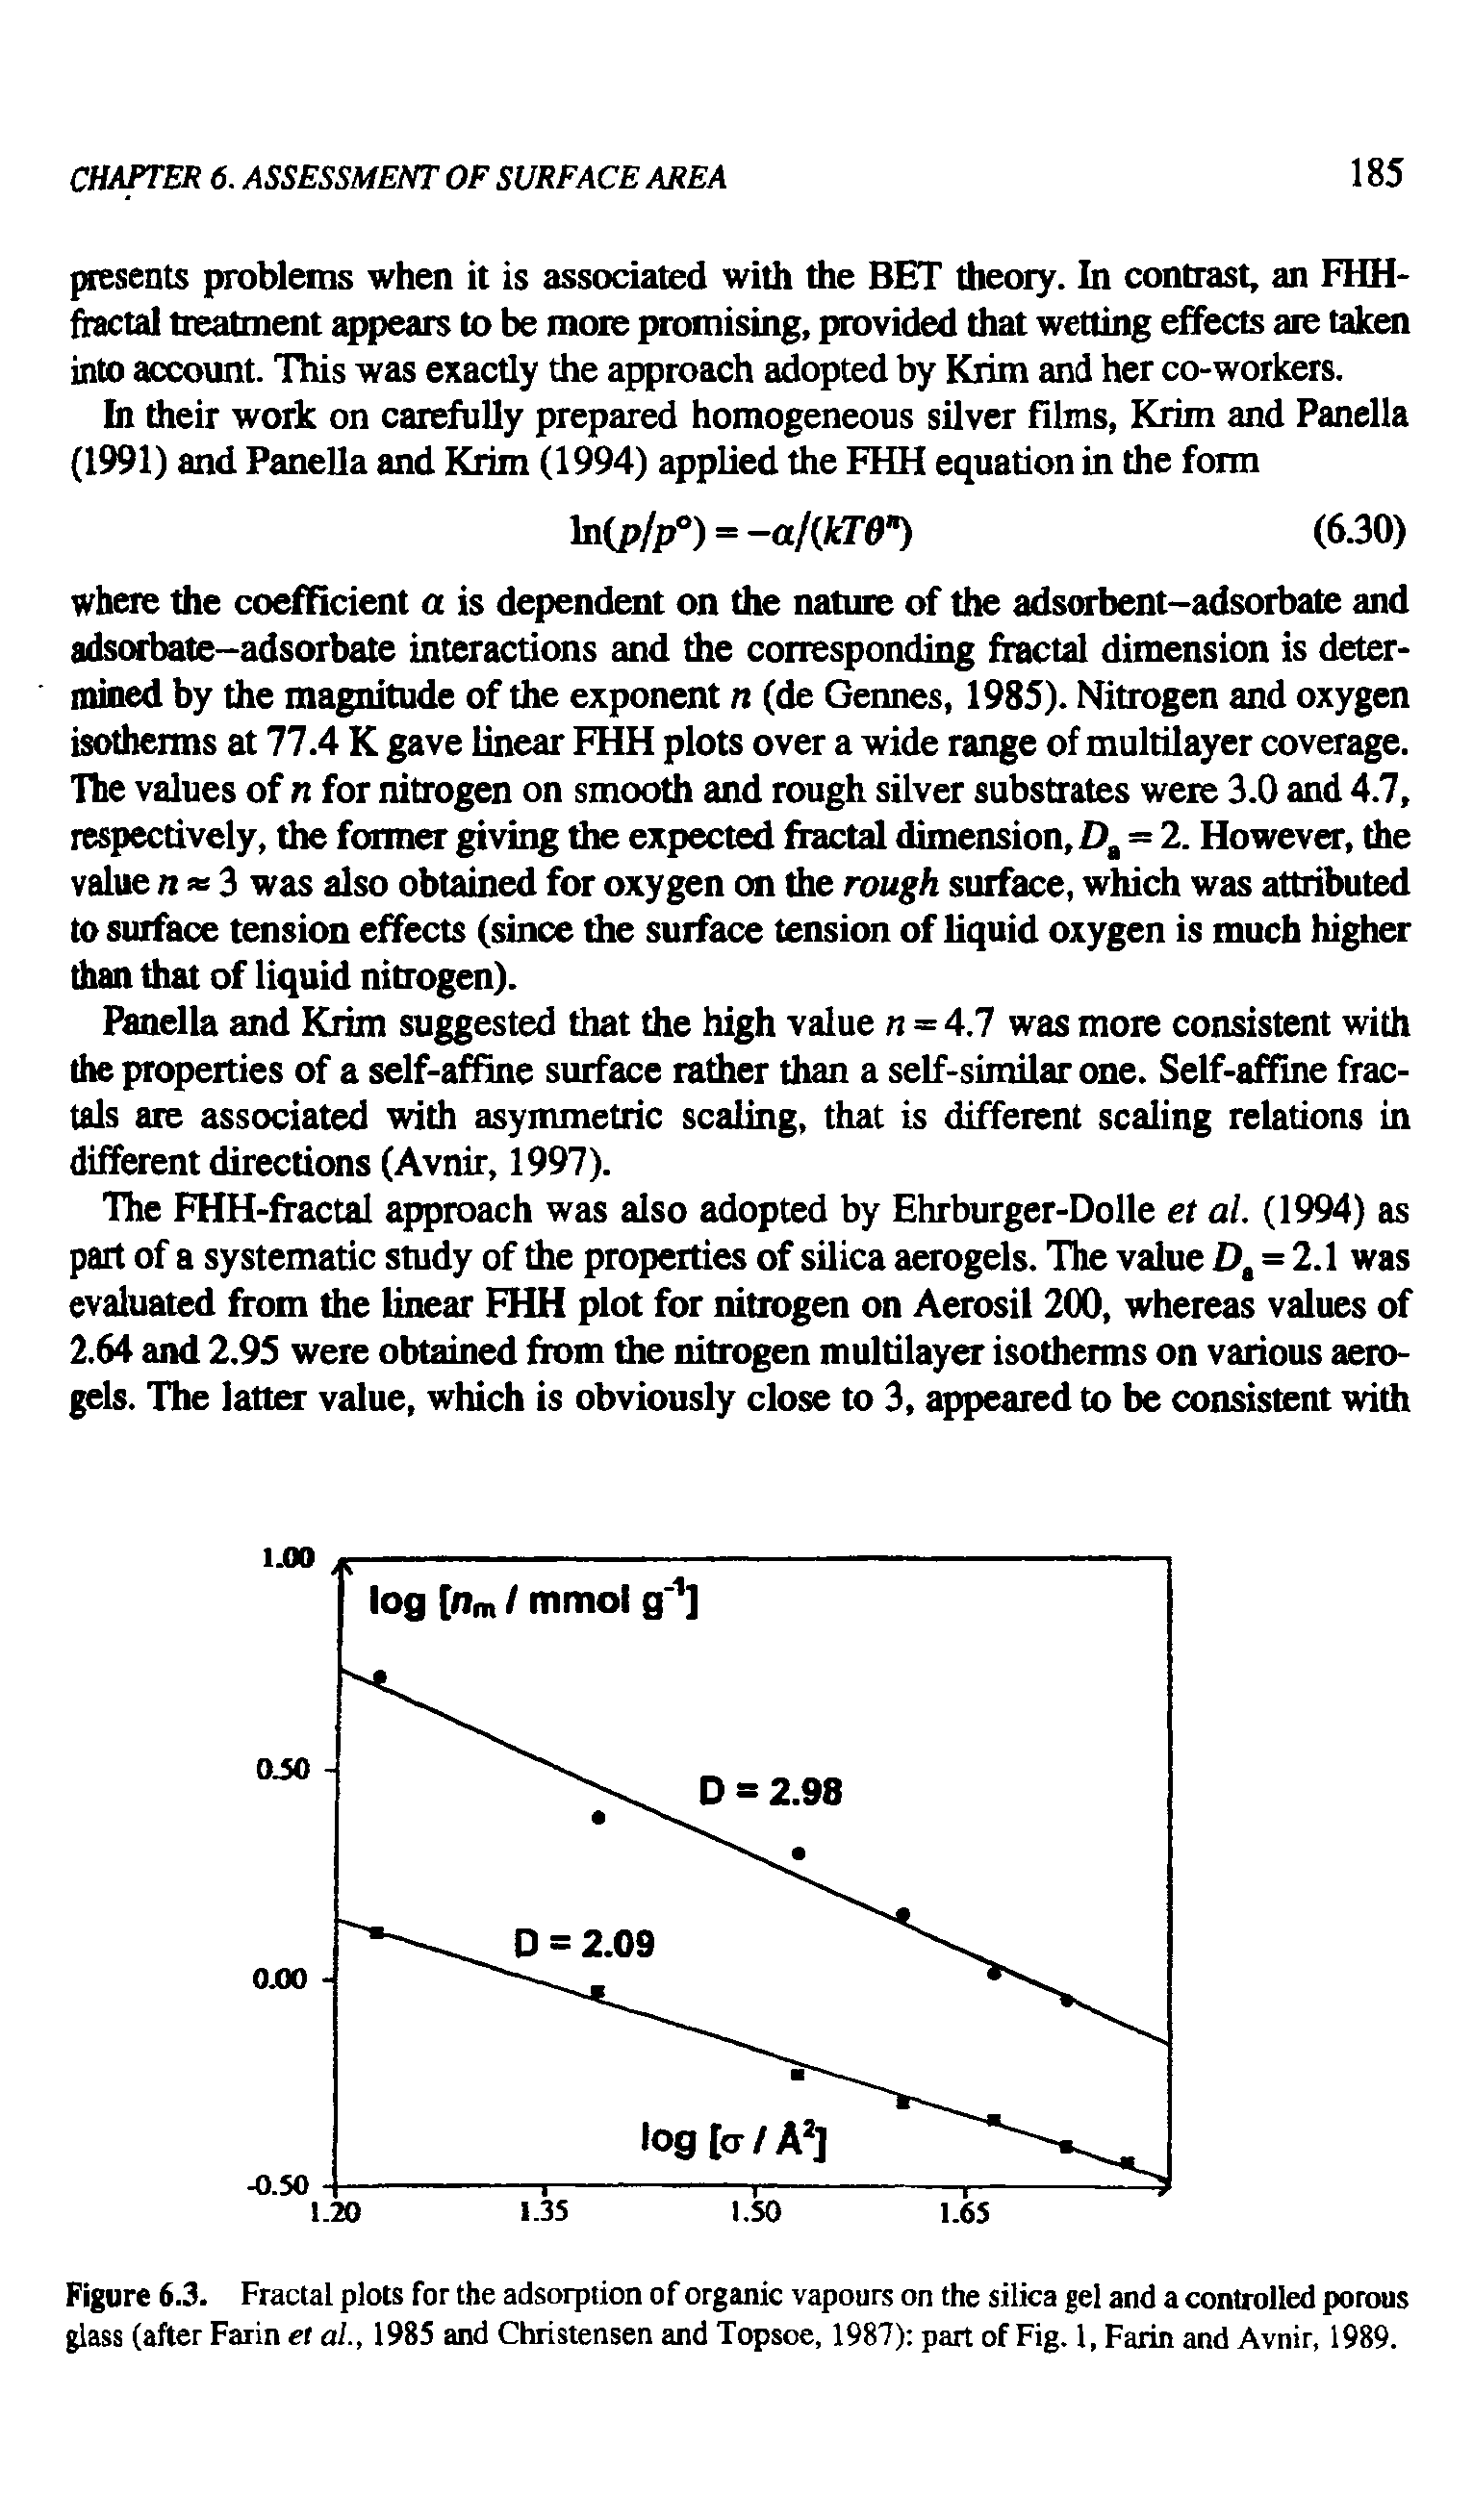 Figure 6.3. Fractal plots for the adsorption of organic vapours on the silica gel and a controlled porous glass (after Faiin et al., 1985 and Christensen and Topsoe, 1987) part of Fig. 1, Farin and Avnir, 1989.